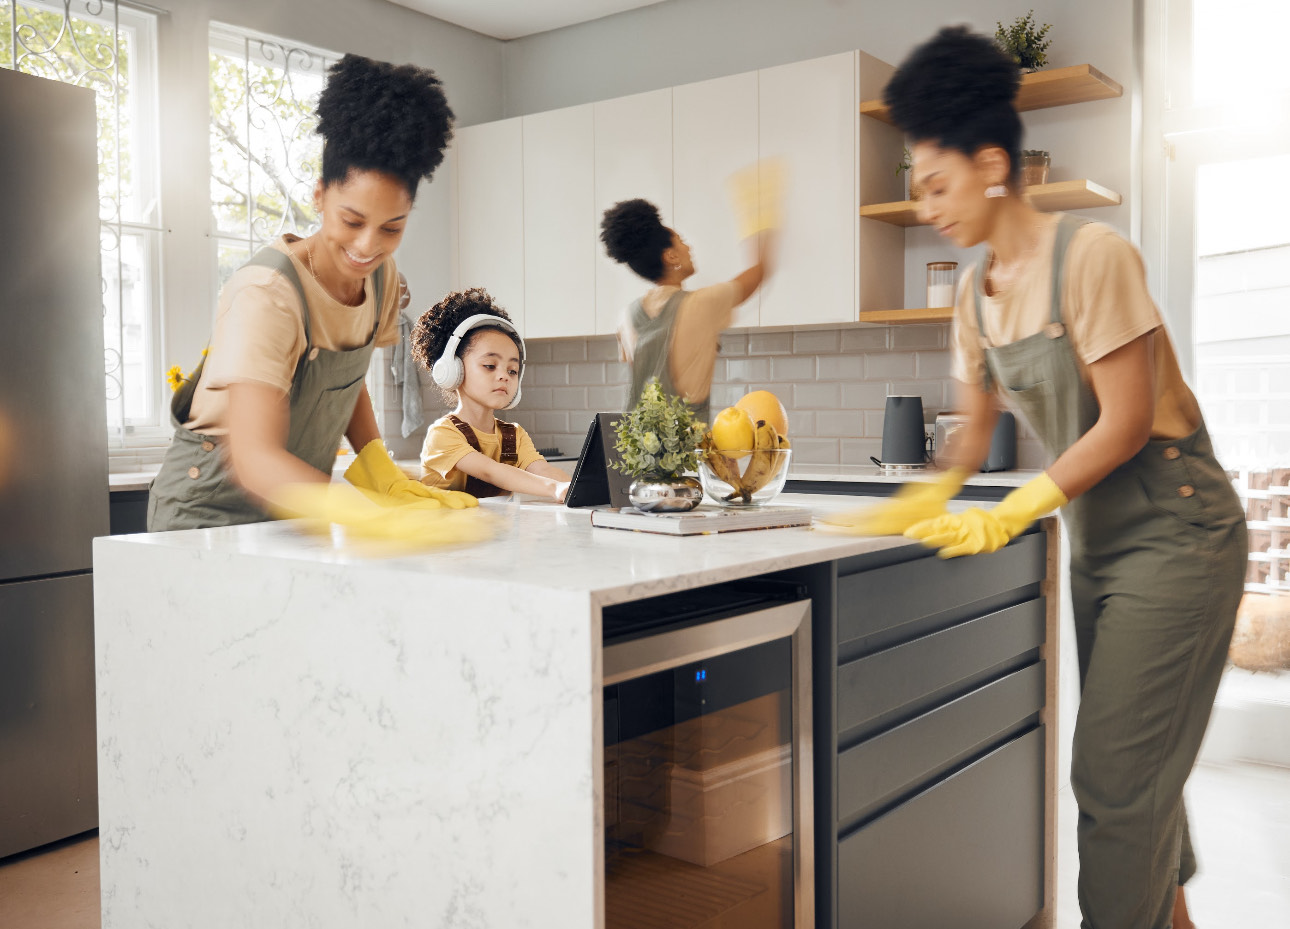 Kitchen Cleaning Checklist: Here's What You Should Clean Daily, Weekly, and Monthly